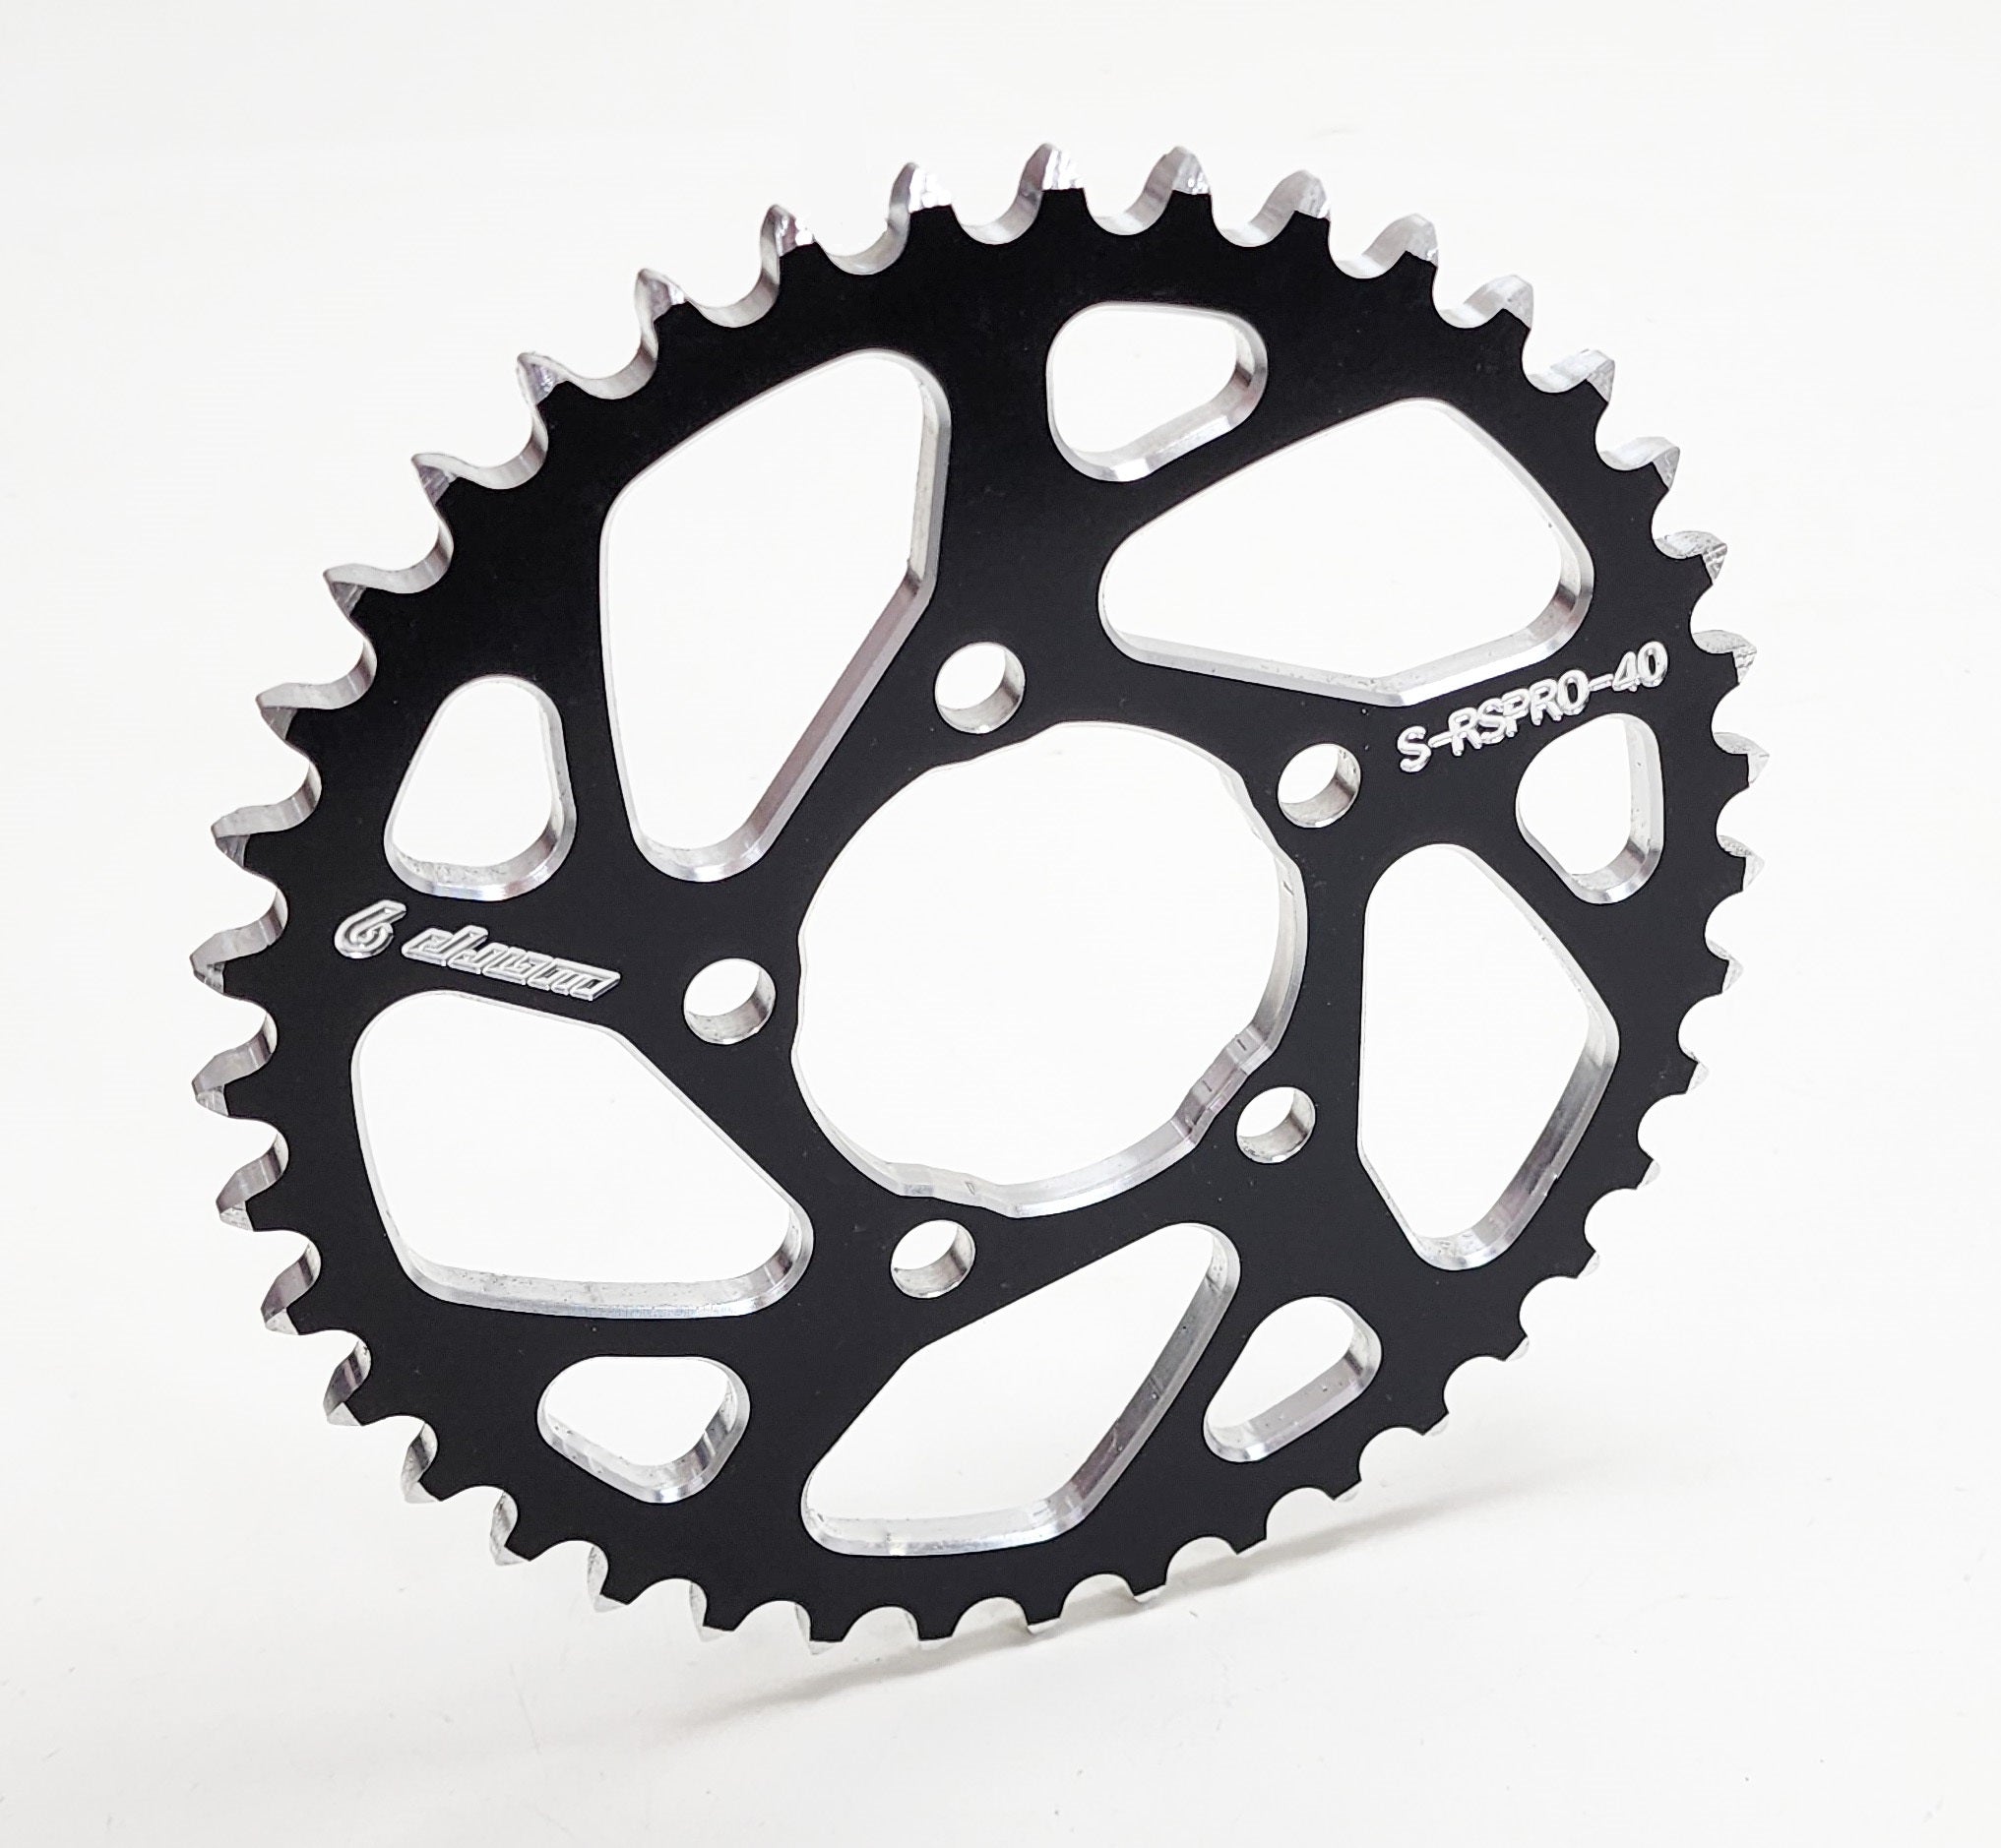 Warp 9 40 tooth sprocket for Surron Lightbee X and Talaria Sting